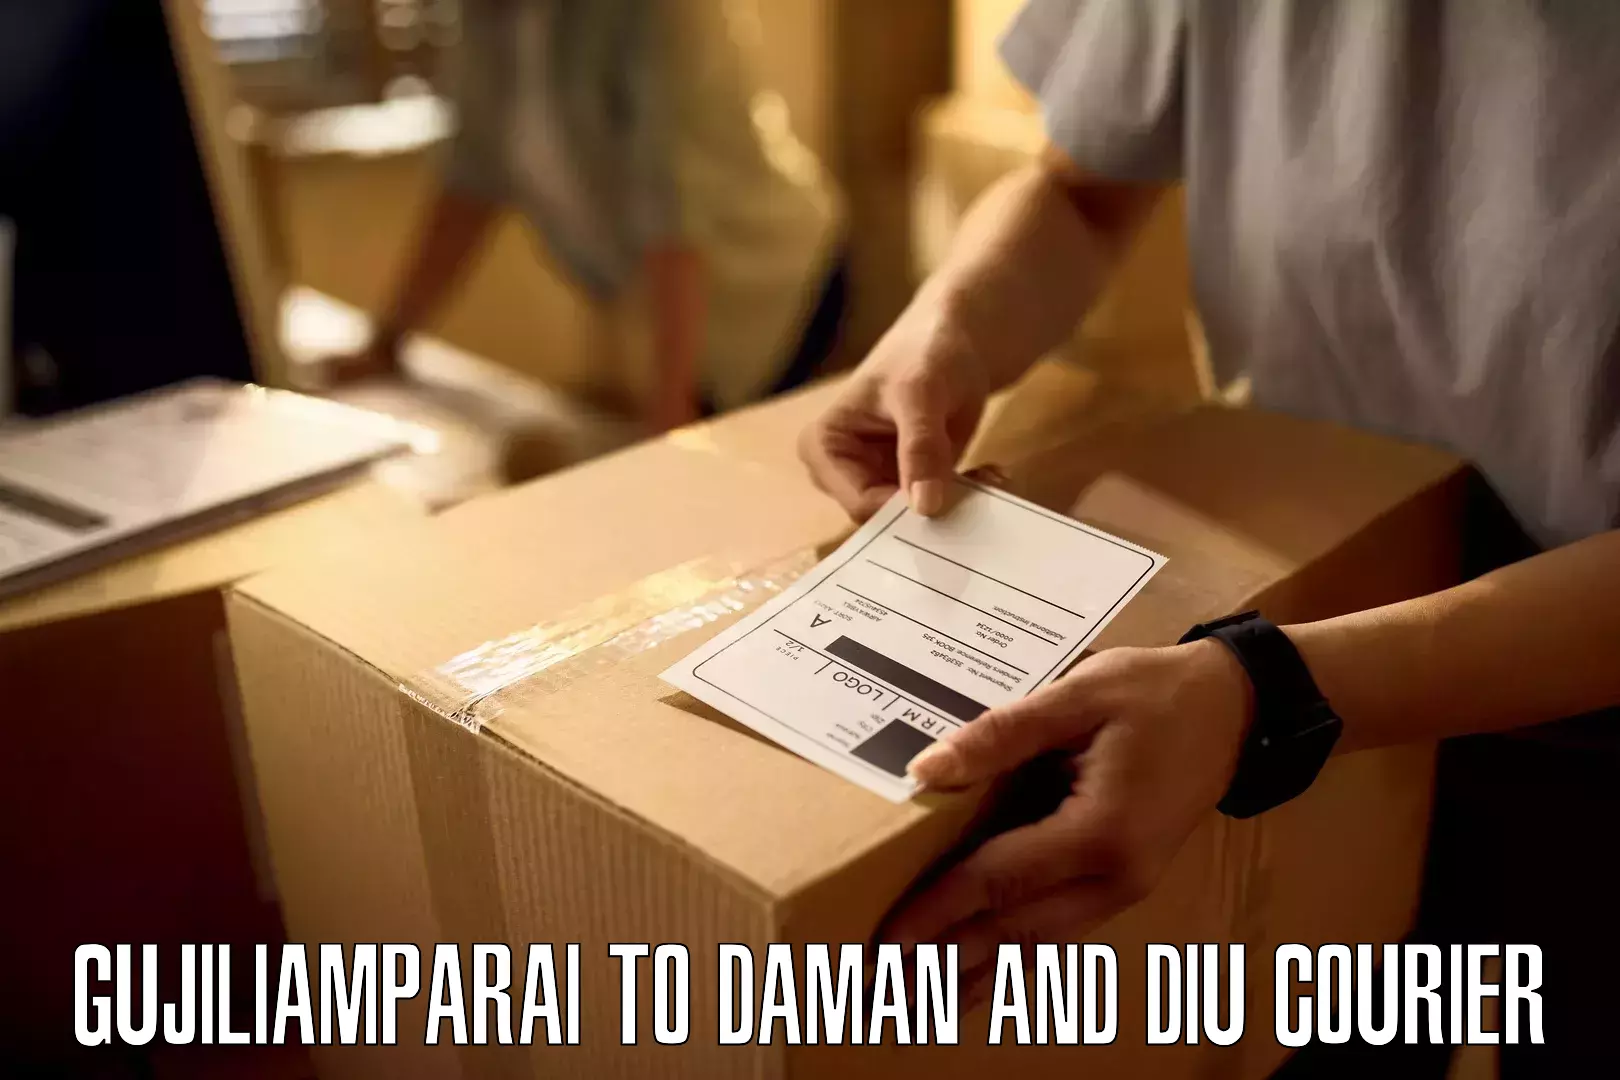 State-of-the-art courier technology Gujiliamparai to Daman and Diu